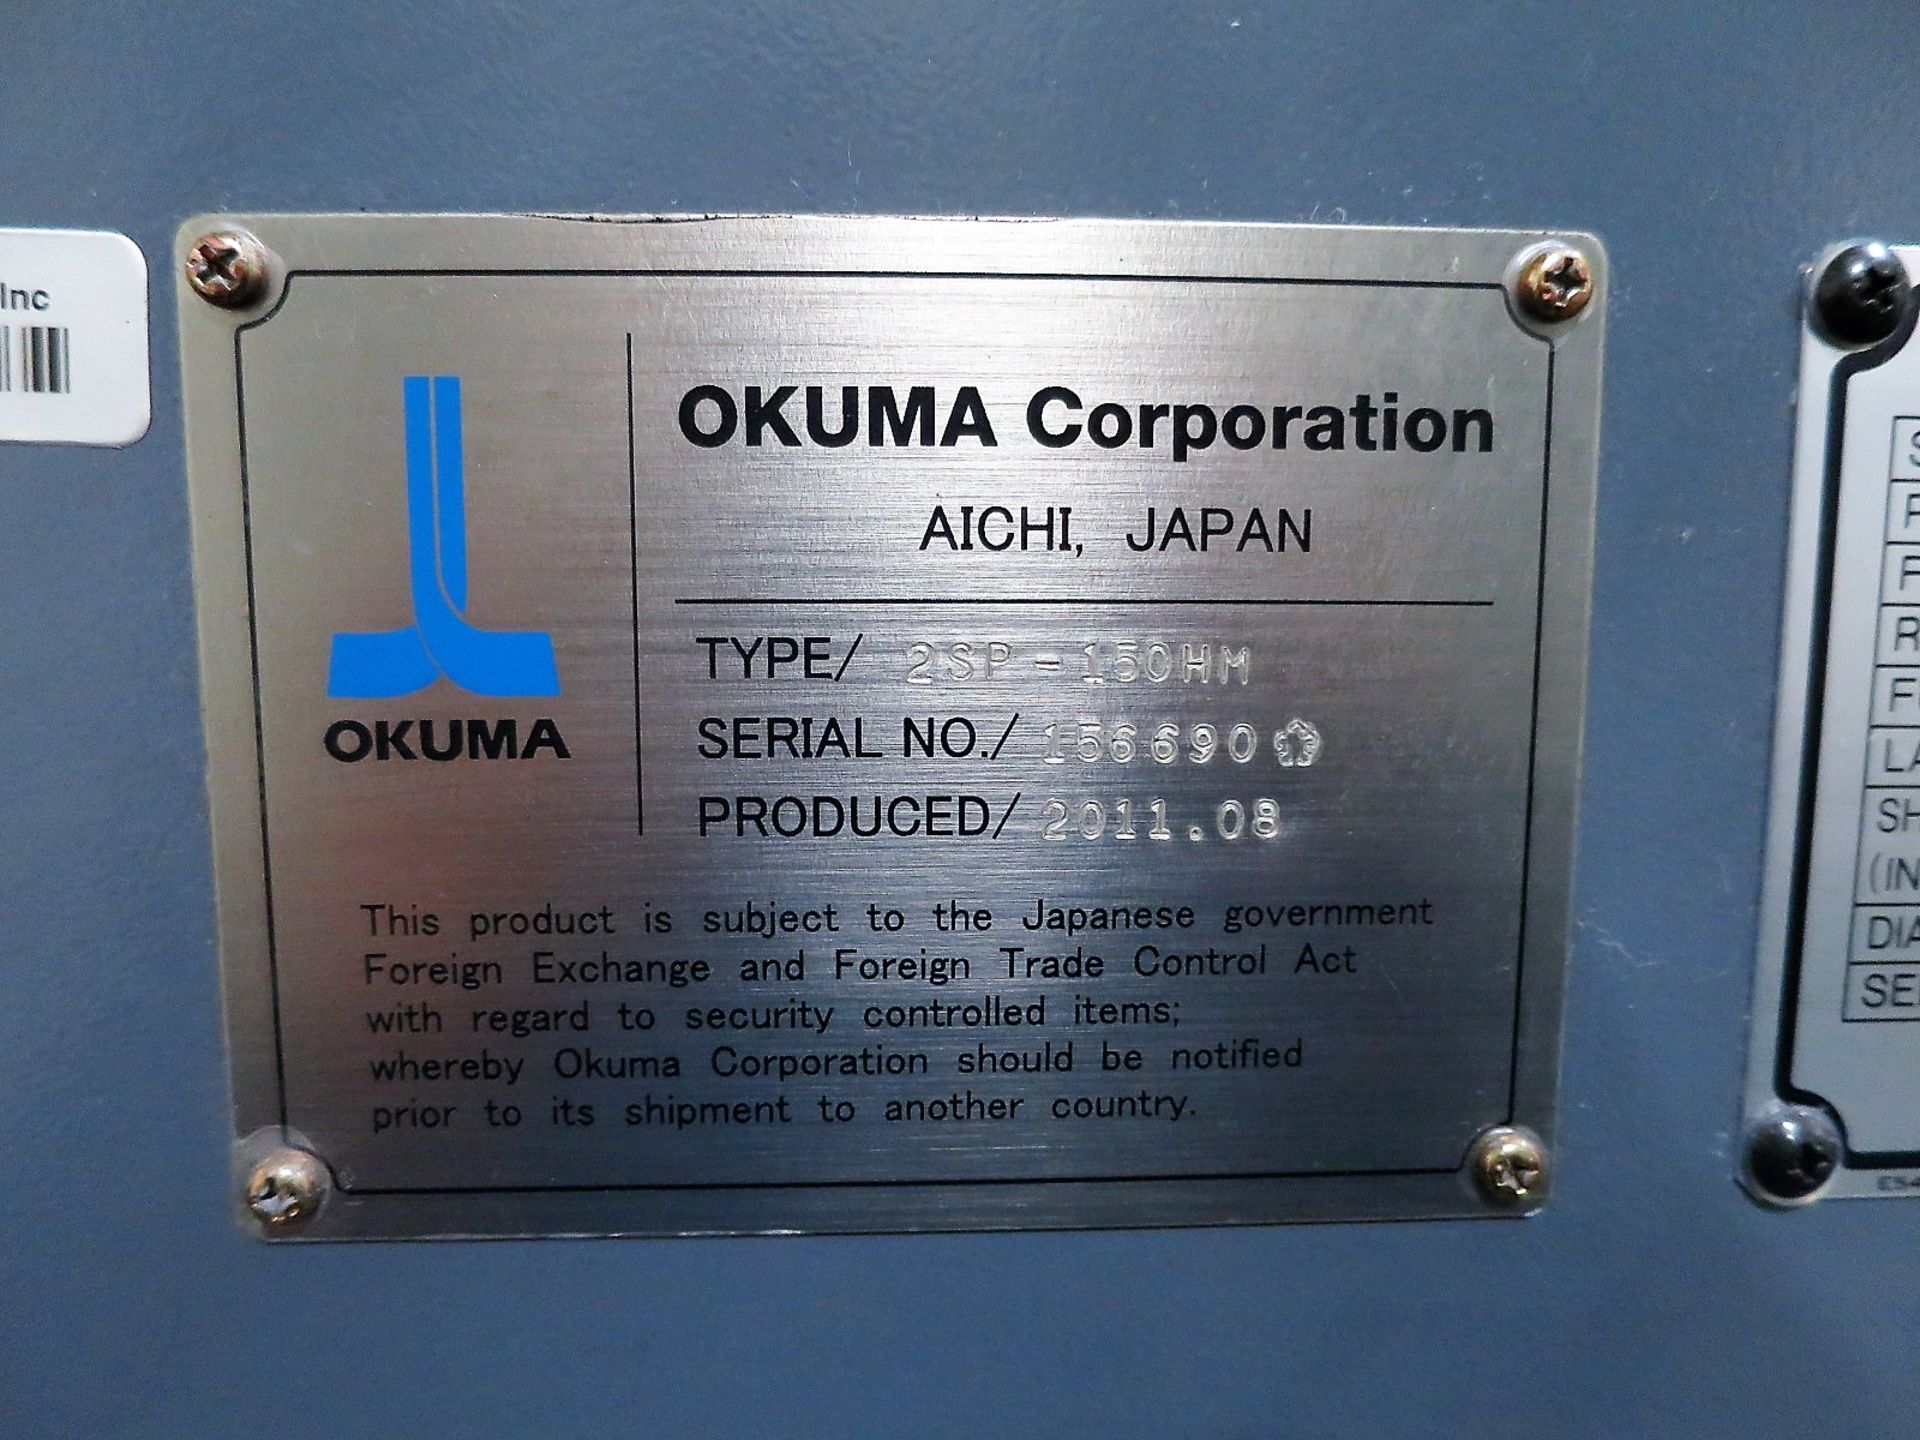 Okuma 2SP-150HM Twin Spindle 3-Axis Turning Center w/Live Milling, S/N 2SP-150HM, New 2011 - Image 11 of 12